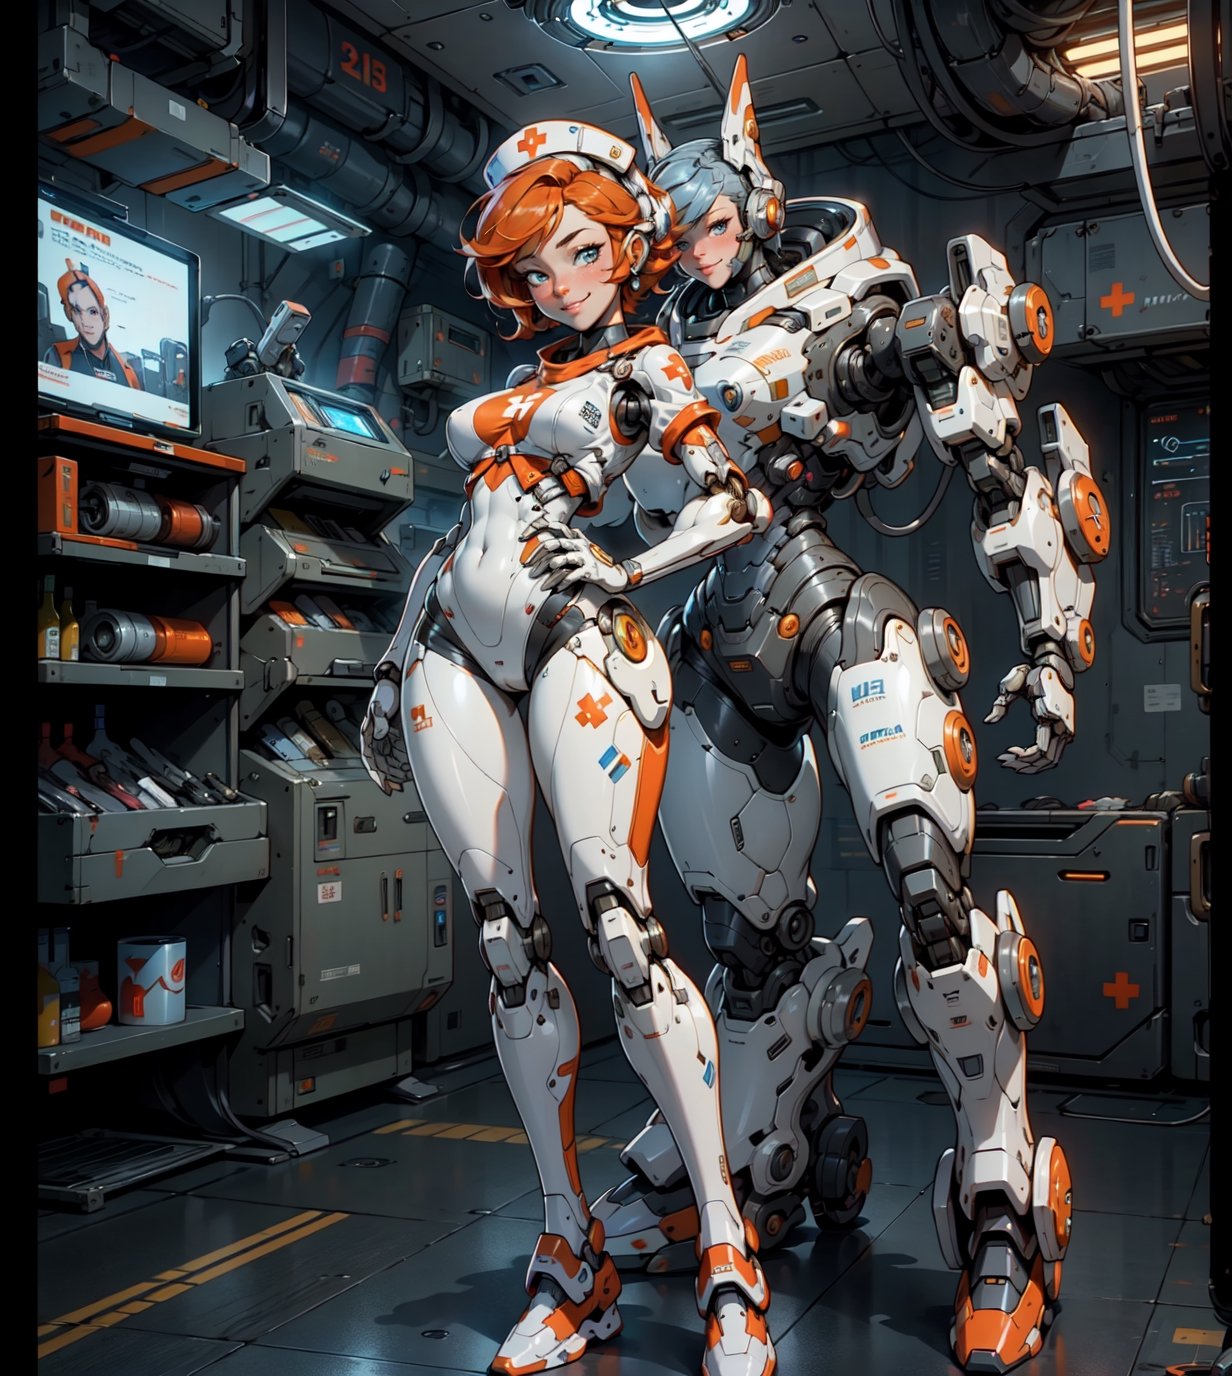  1 girl , Nurse , cute girl, pretty eyes, cheeky face , short Orange hair, naked, big boobs, curvy_figure , appendages in matching pairs , proper robot Sneakers , proper robot hands , naughty grin , Sci-fi, ultra high res, futuristic , {(little robot)}, {(solo)}, full body , {(complex, Machine background ,spaceship Medical bay interior background, Mecha medical parts)}